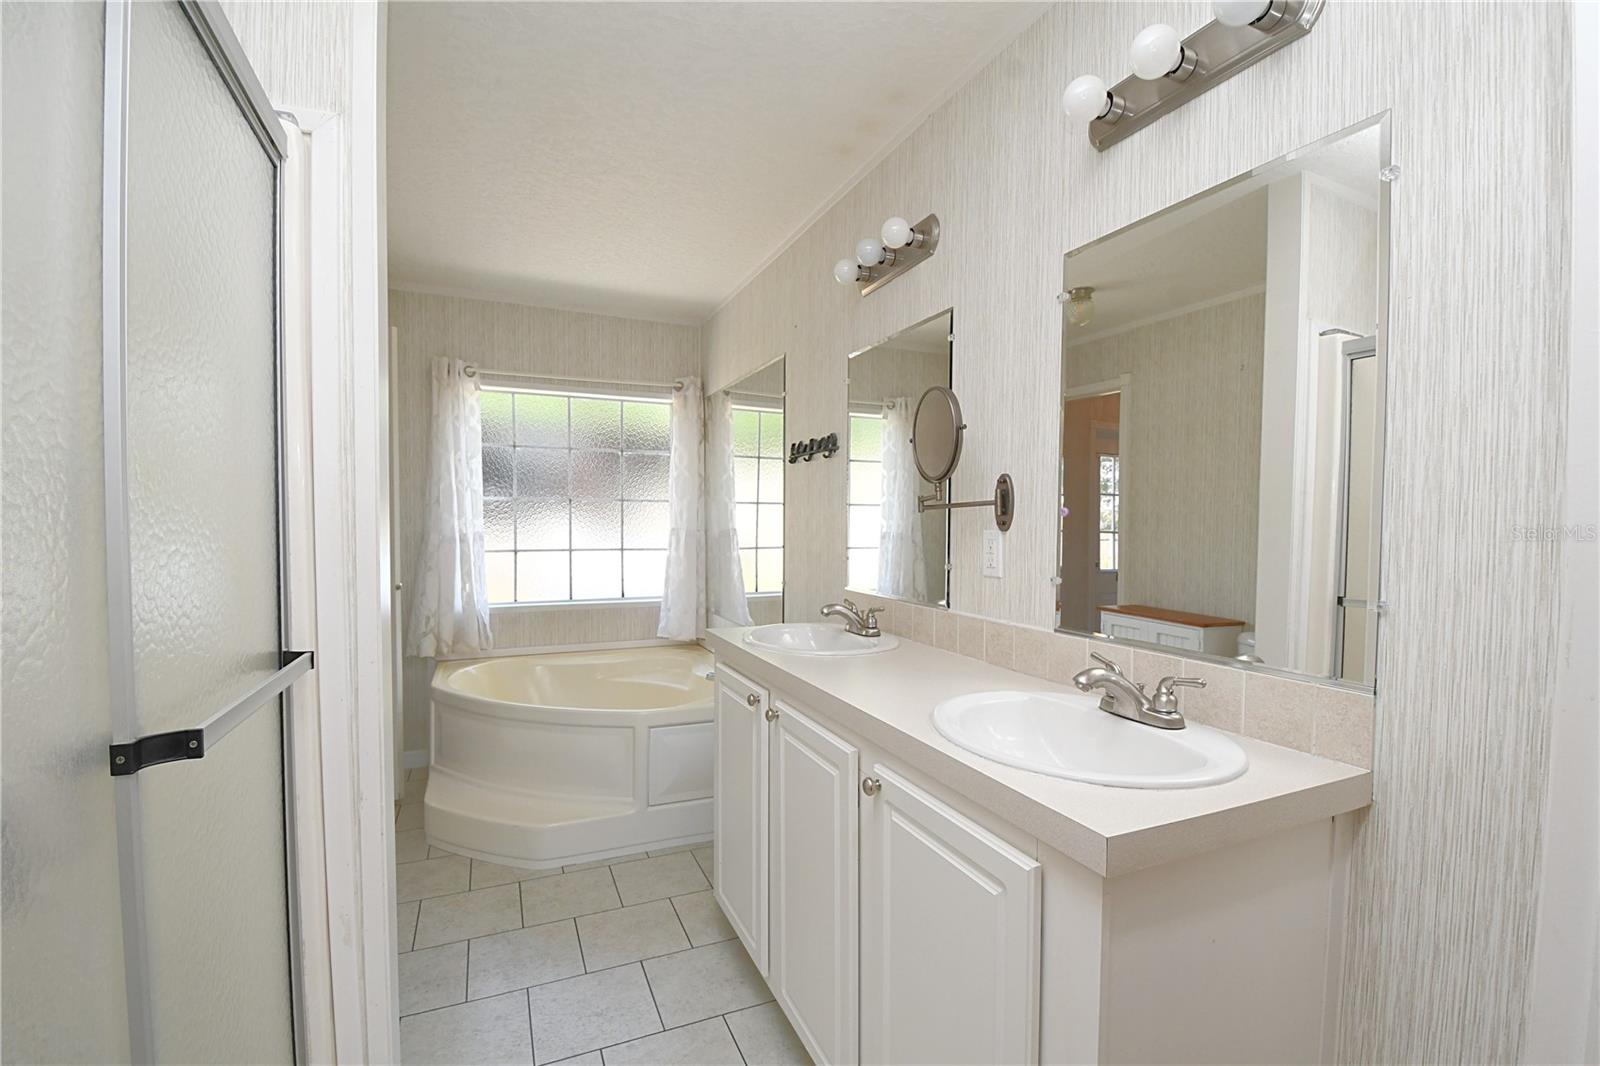 The master ensuite bathroom has a double sink mirrored vanity with lighting and storage beneath.